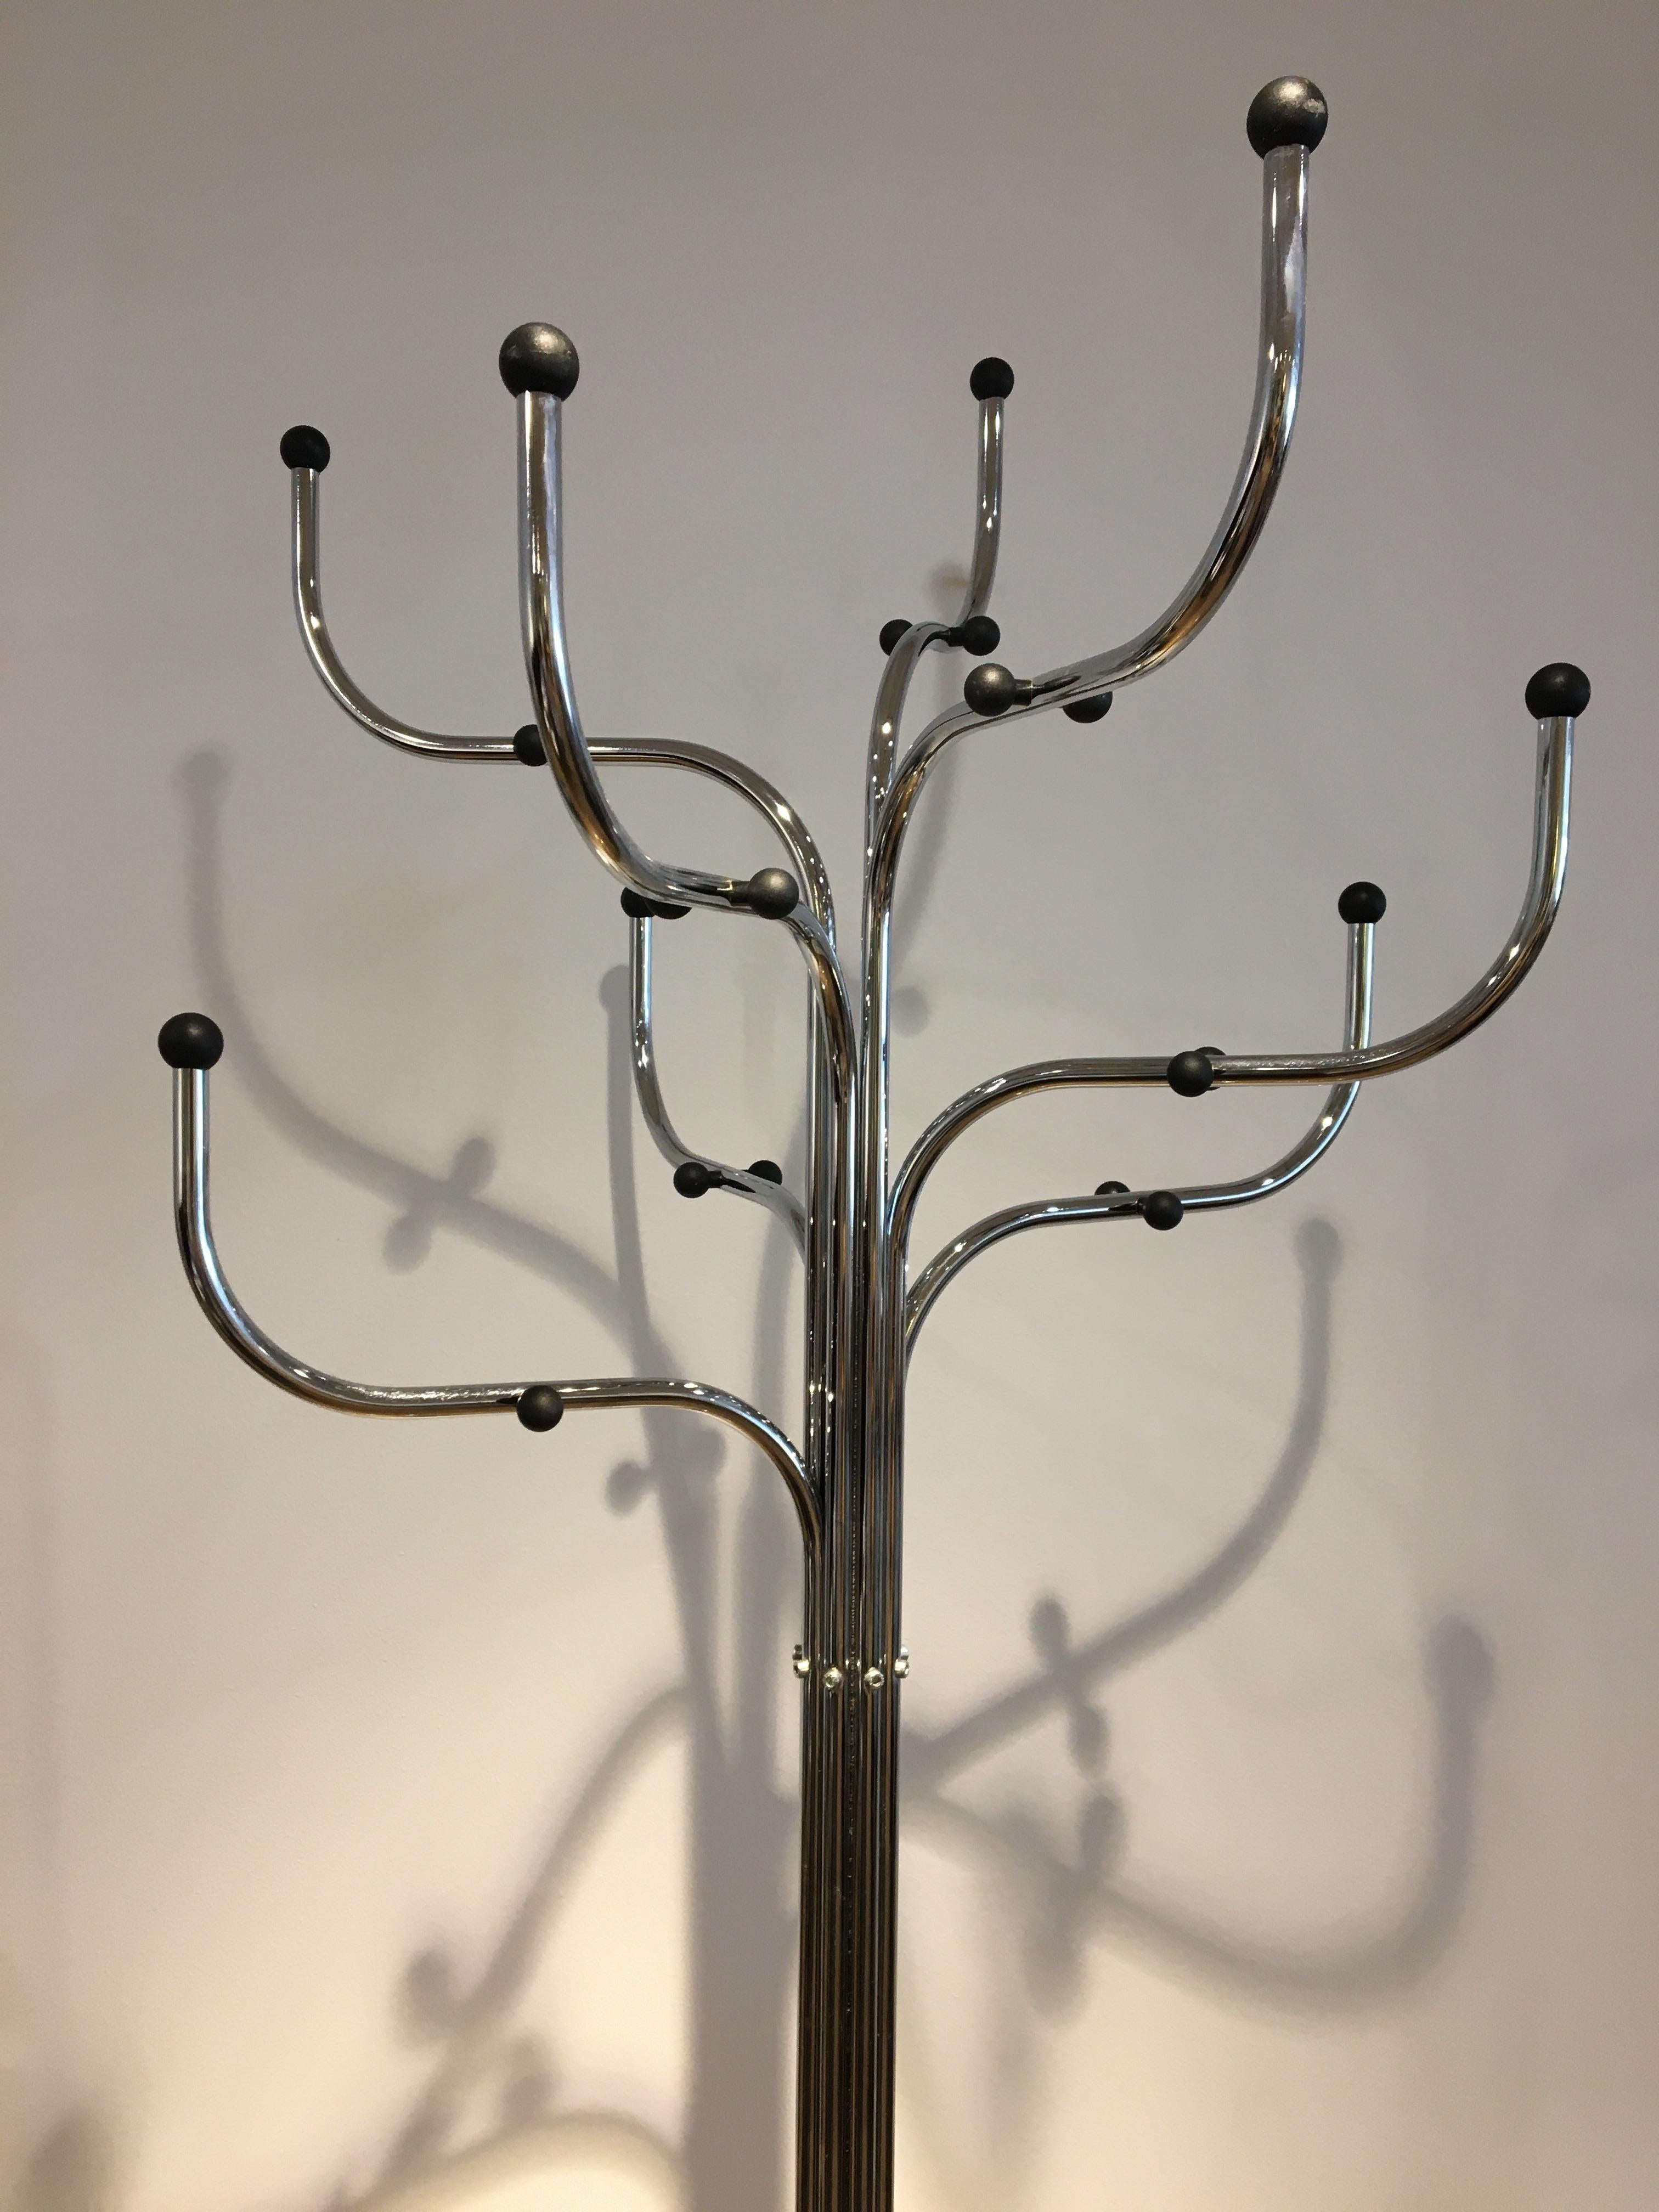 Danish 'Coat Tree' in chromed steel with black hooks / dots.
Design: Sidse Werner.
Produced by Fritz Hansen 1997.
A piece of sculpture to have standing a sturdy silencer that can withstand the suspension of large numbers of outerwear.
Designed